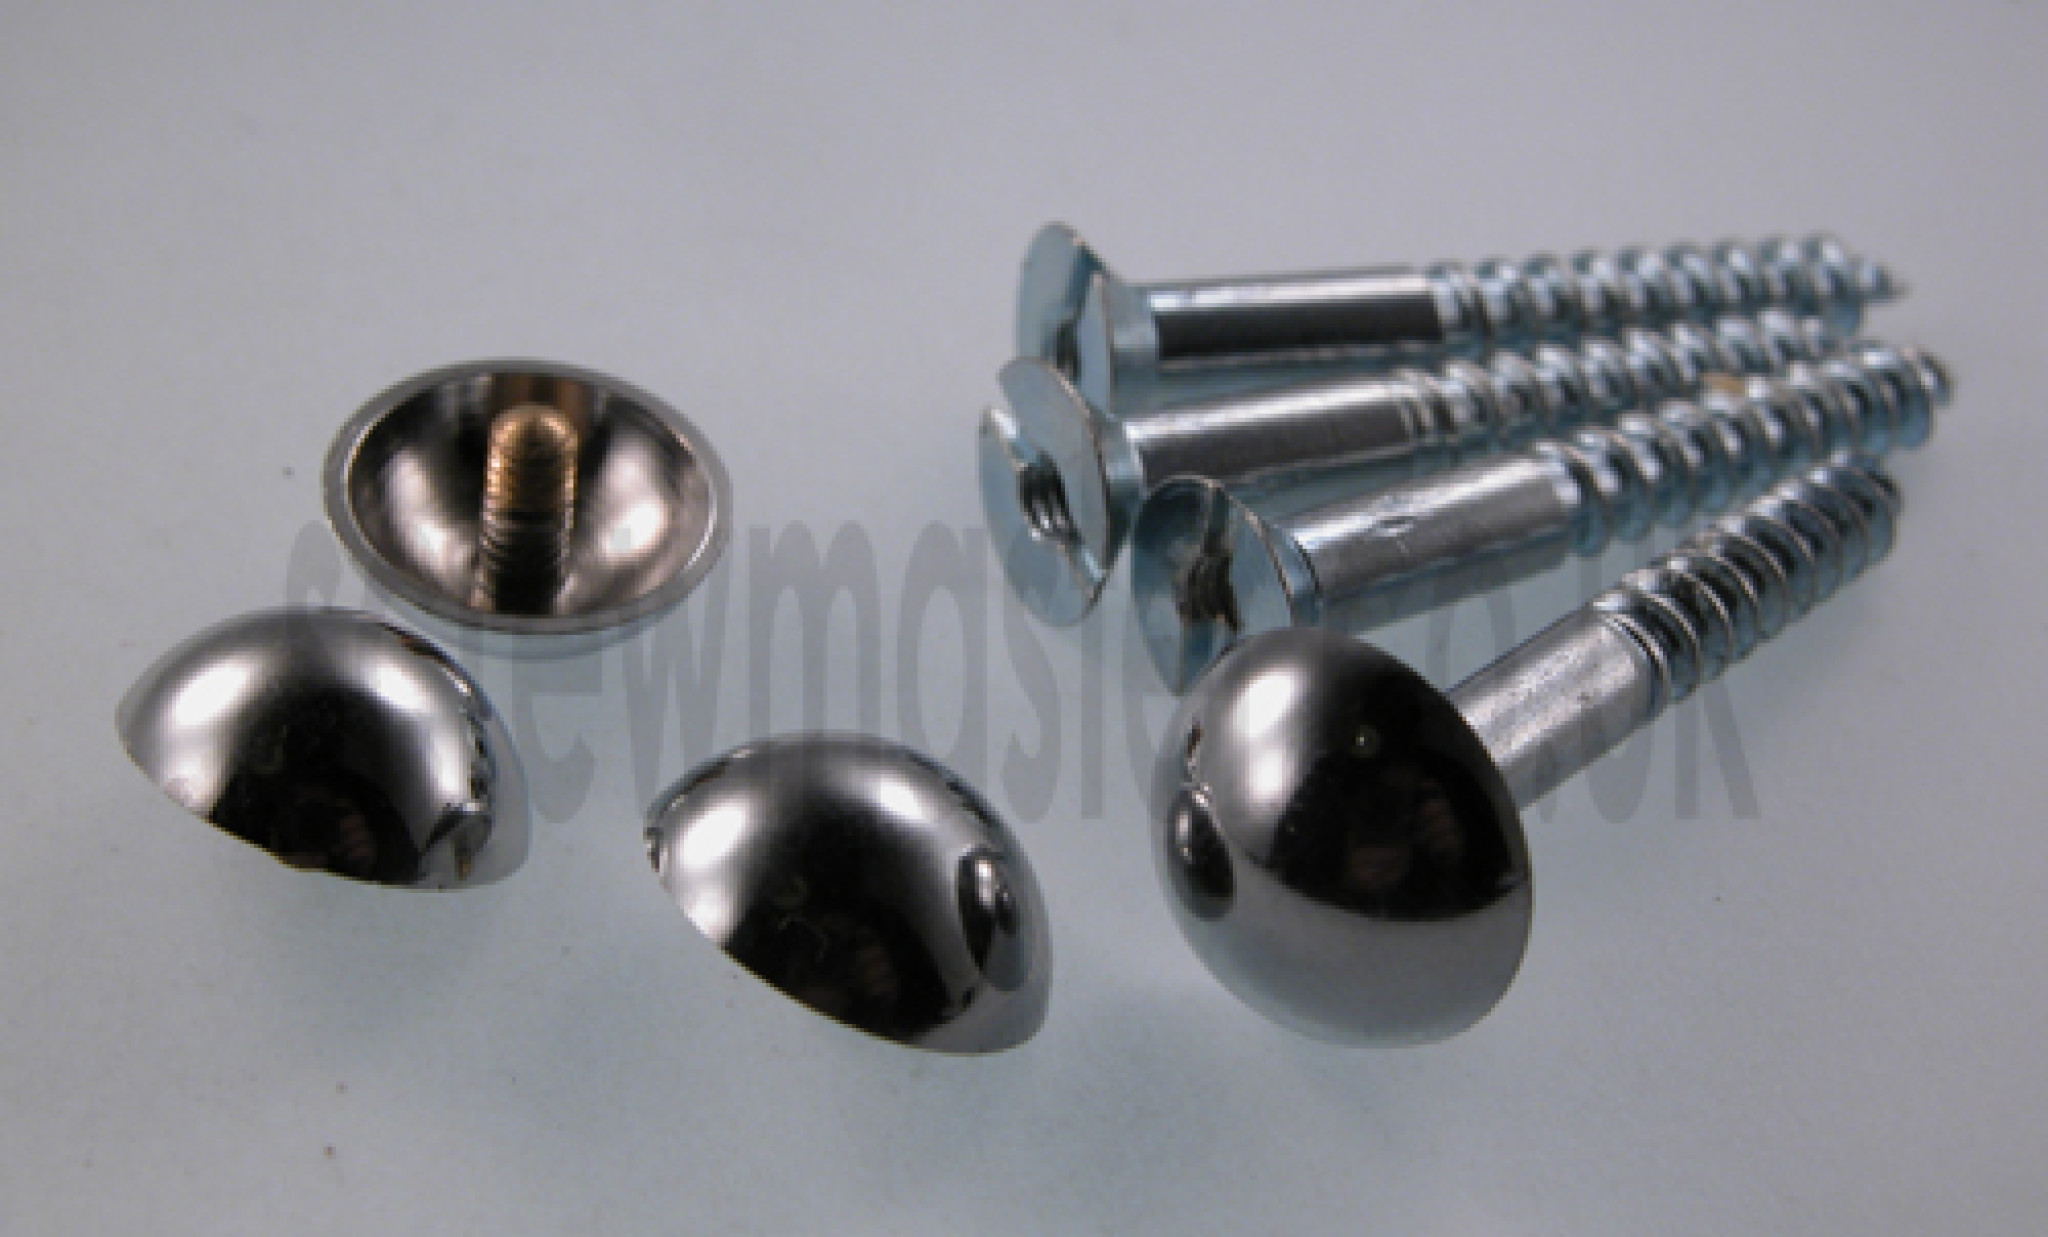 x 8g MIRROR SCREWS W/ CHROME DOME CAPS & PROTECTIVE RUBBER GROMMETS * 2" 50mm 